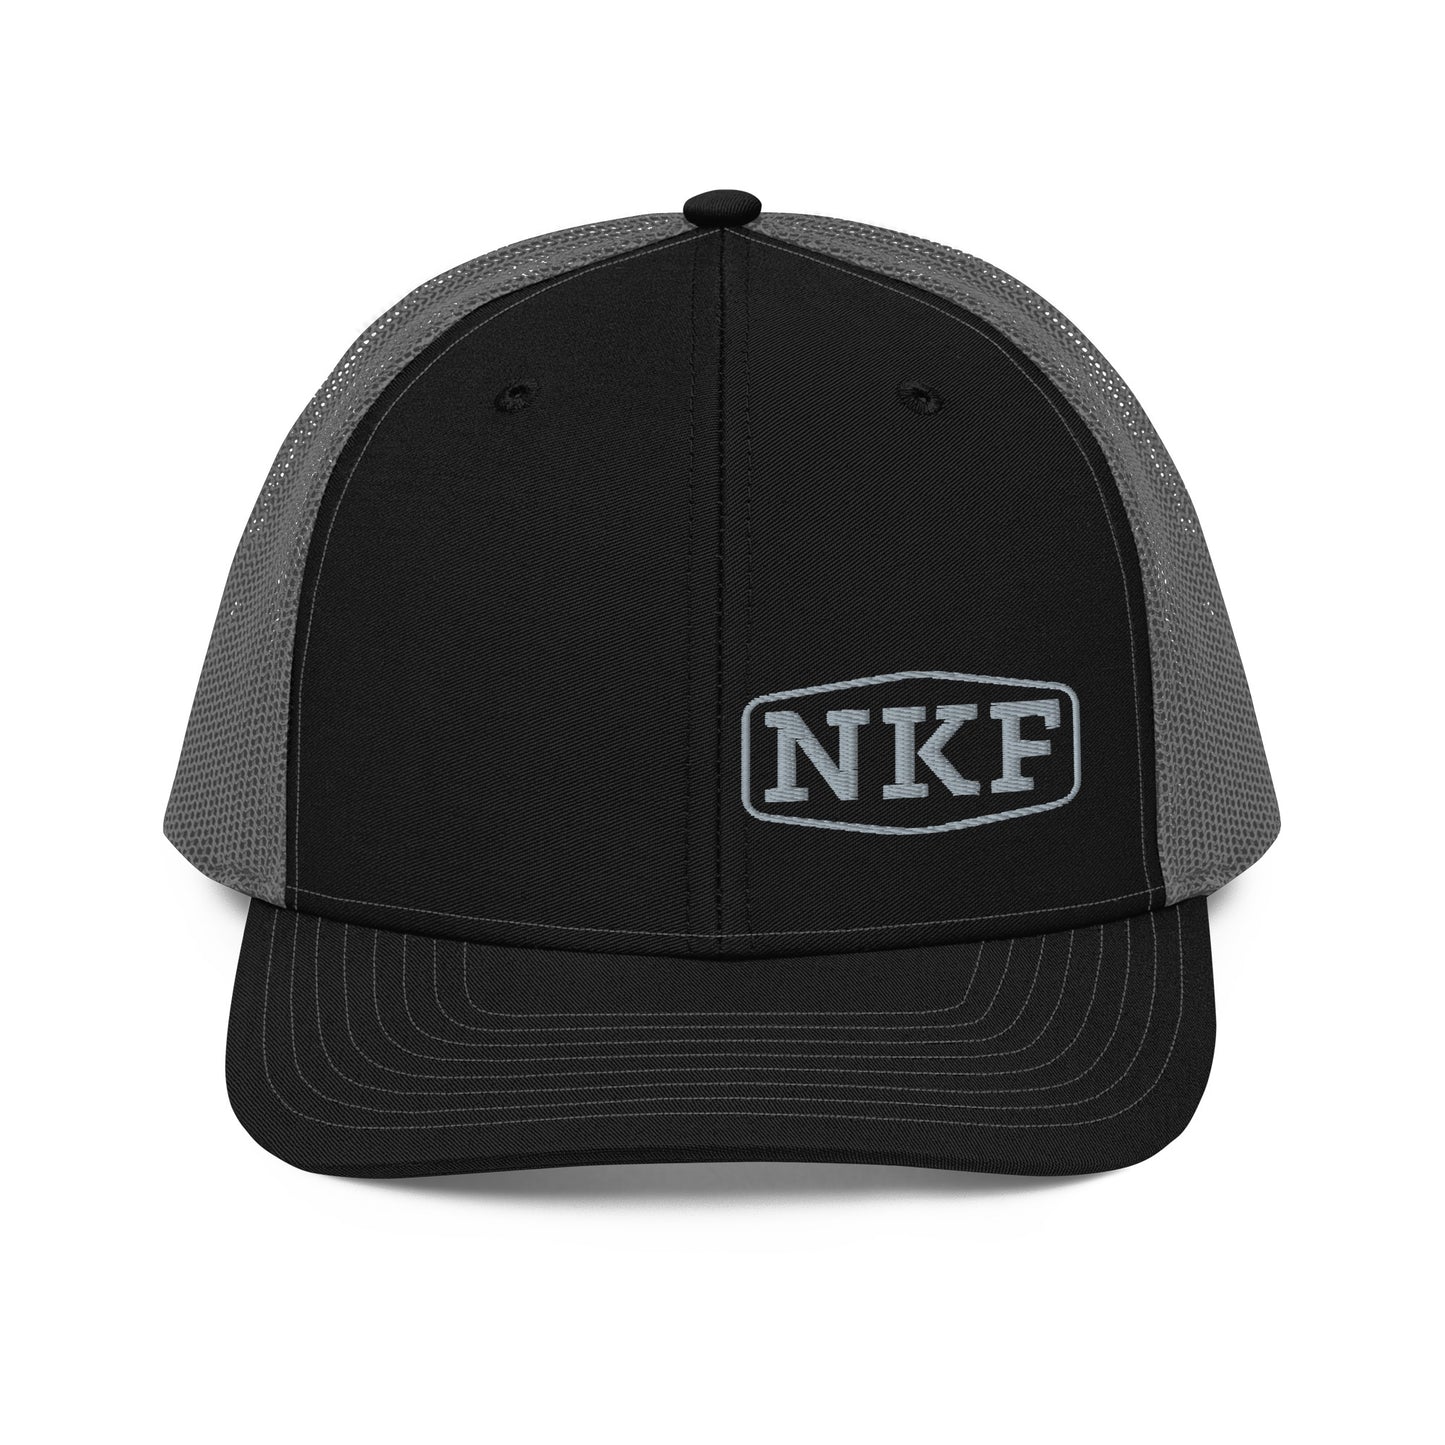 NKF Hat with Grey Embroidery